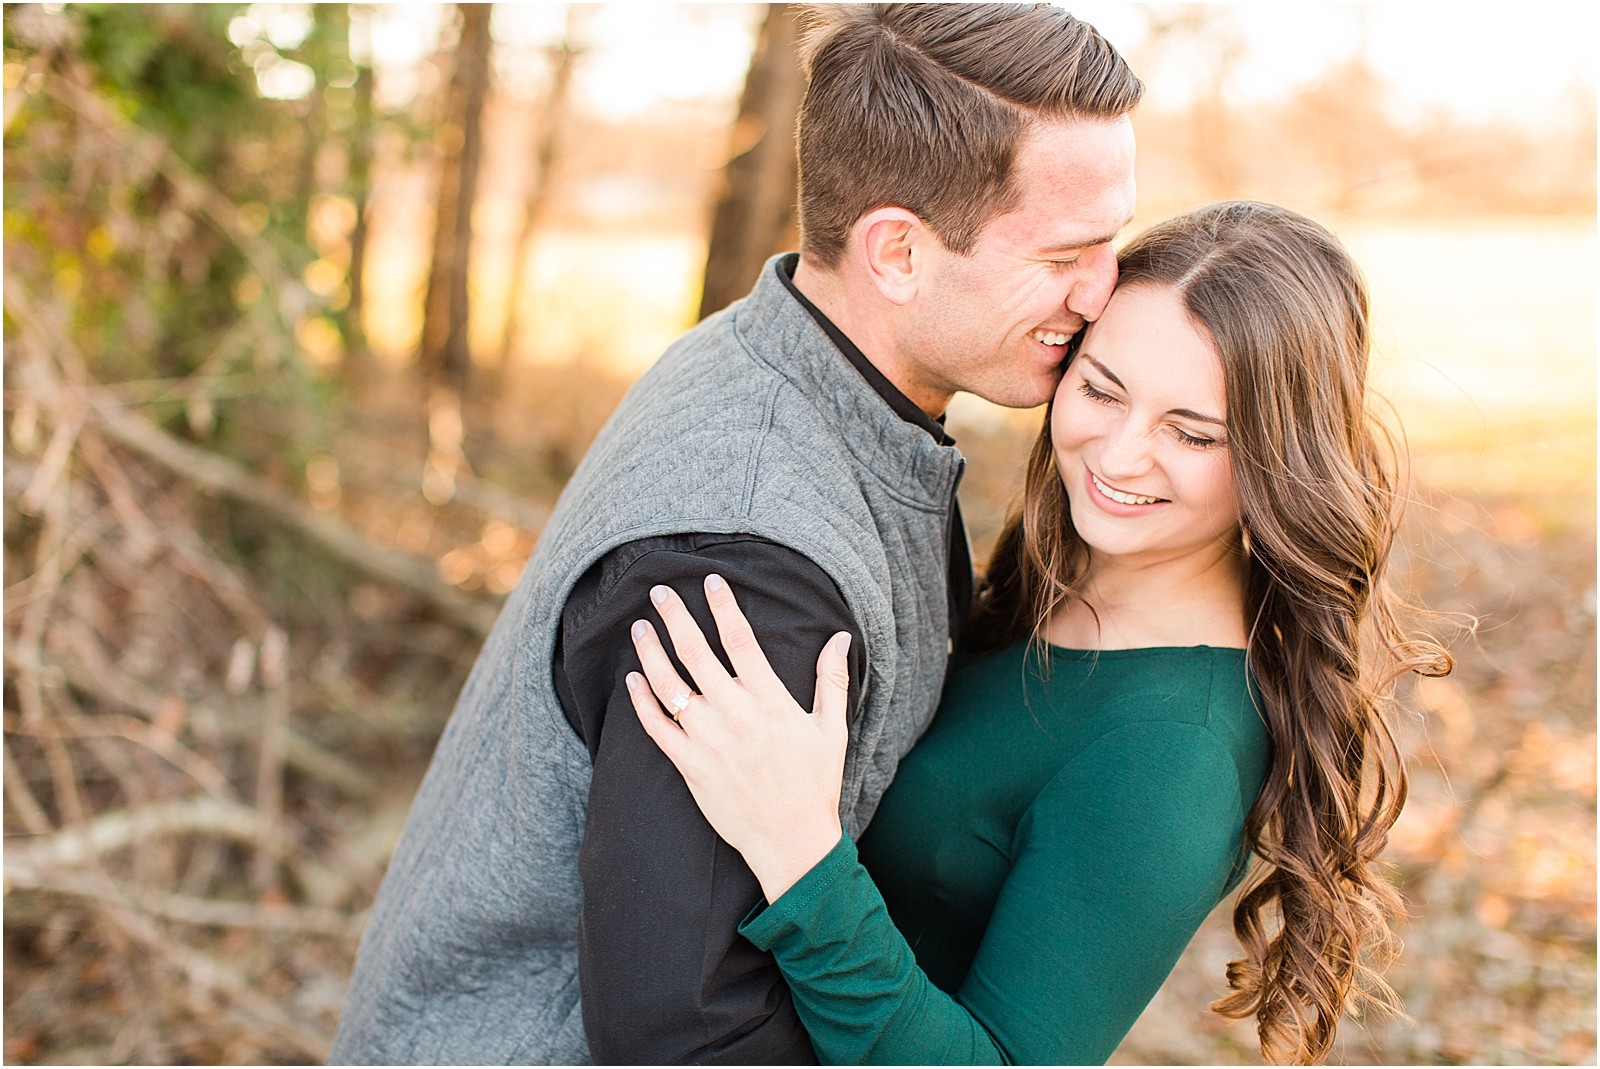 Kaley and Devon's fall Evansville Indiana engagement session. | #fallengagementsession #evansvilleindiana #evansvilleindianawedding | 0015.jpg